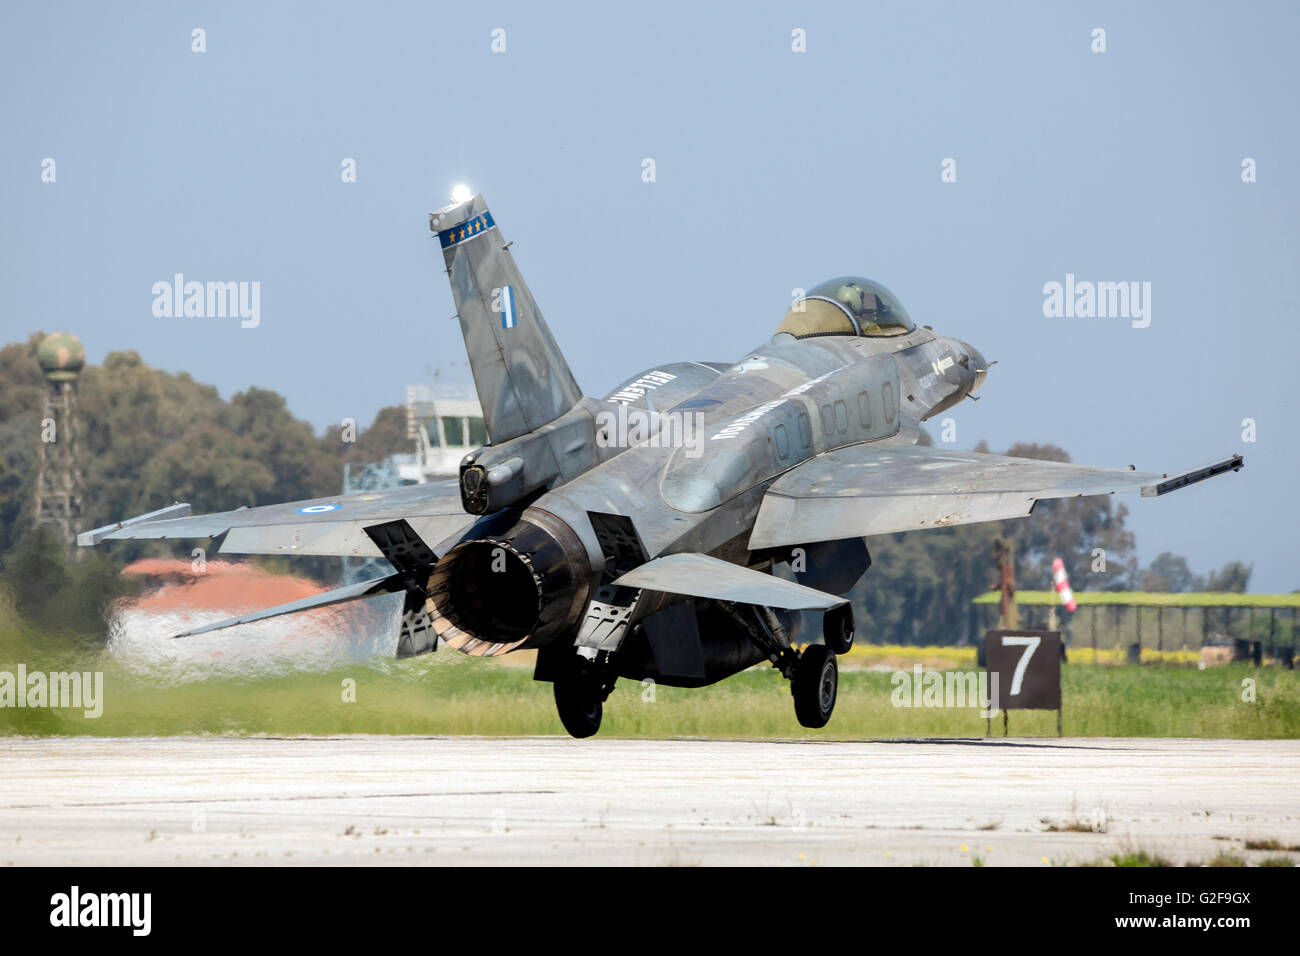 A Hellenic Air Force F-16C Block 52 landing on runway during joint exercise INIOHOS 2016 in Andravida, Greece. Stock Photo